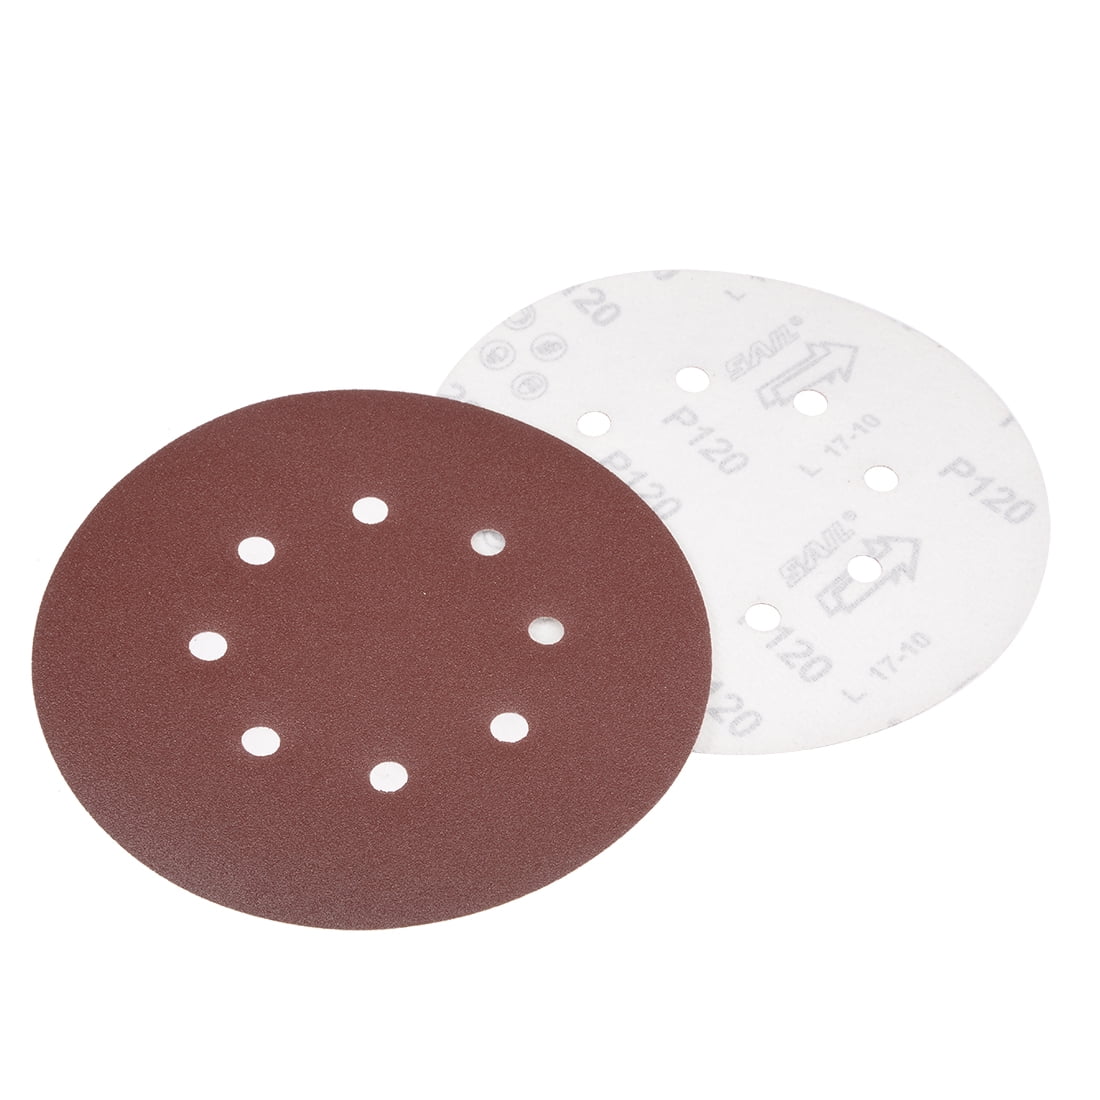 Punched Sanding Discs 125mm 10pk Grit 60 Hook And Loop Aluminium Oxide 